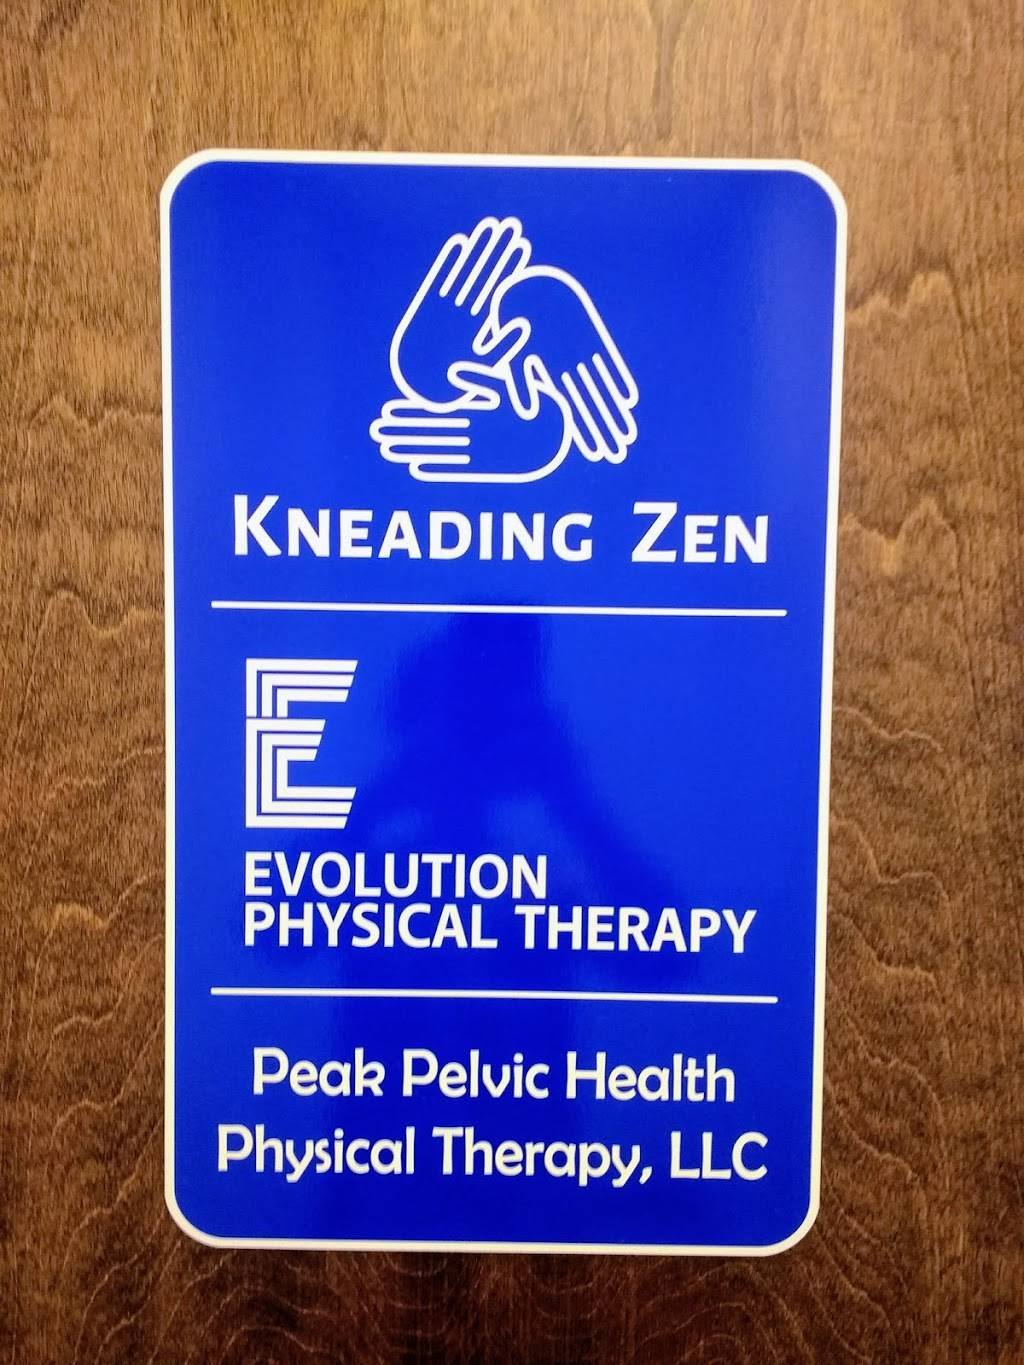 Evolution Physical Therapy and Wellness | 160 Macgregor Pines Dr #101, Cary, NC 27511, USA | Phone: (910) 688-3088